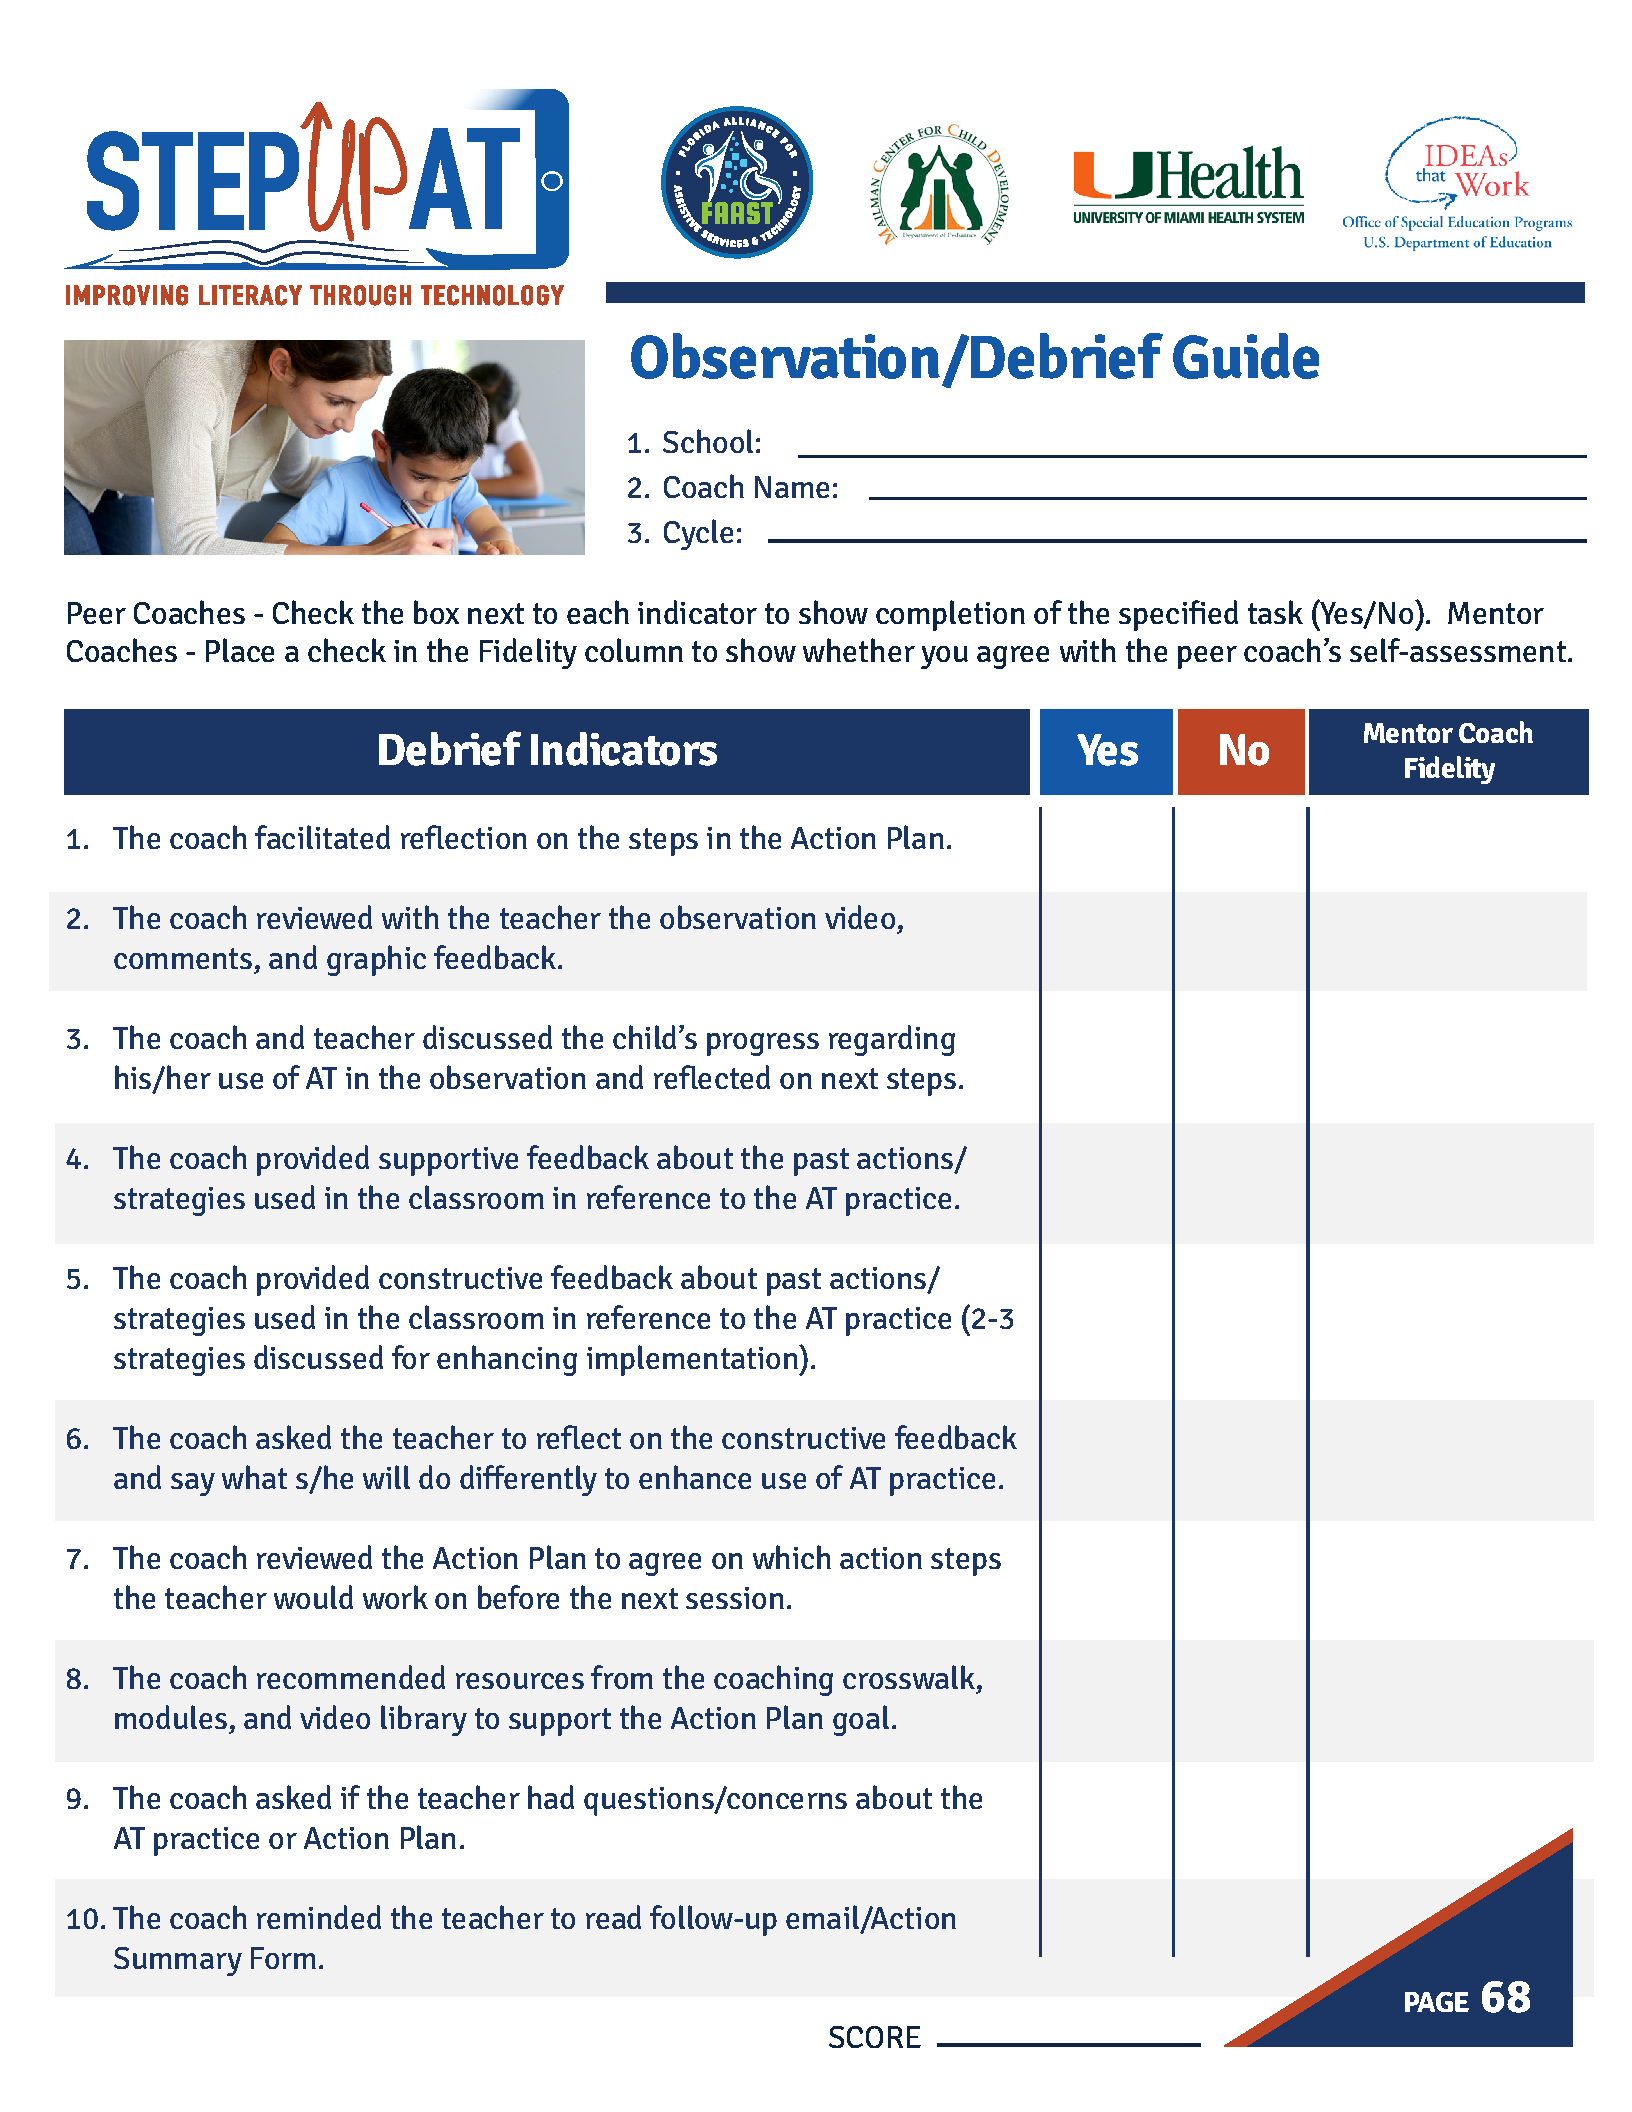 Step Up AT sample of the Observation Debrief Guide from the Coaching Manual